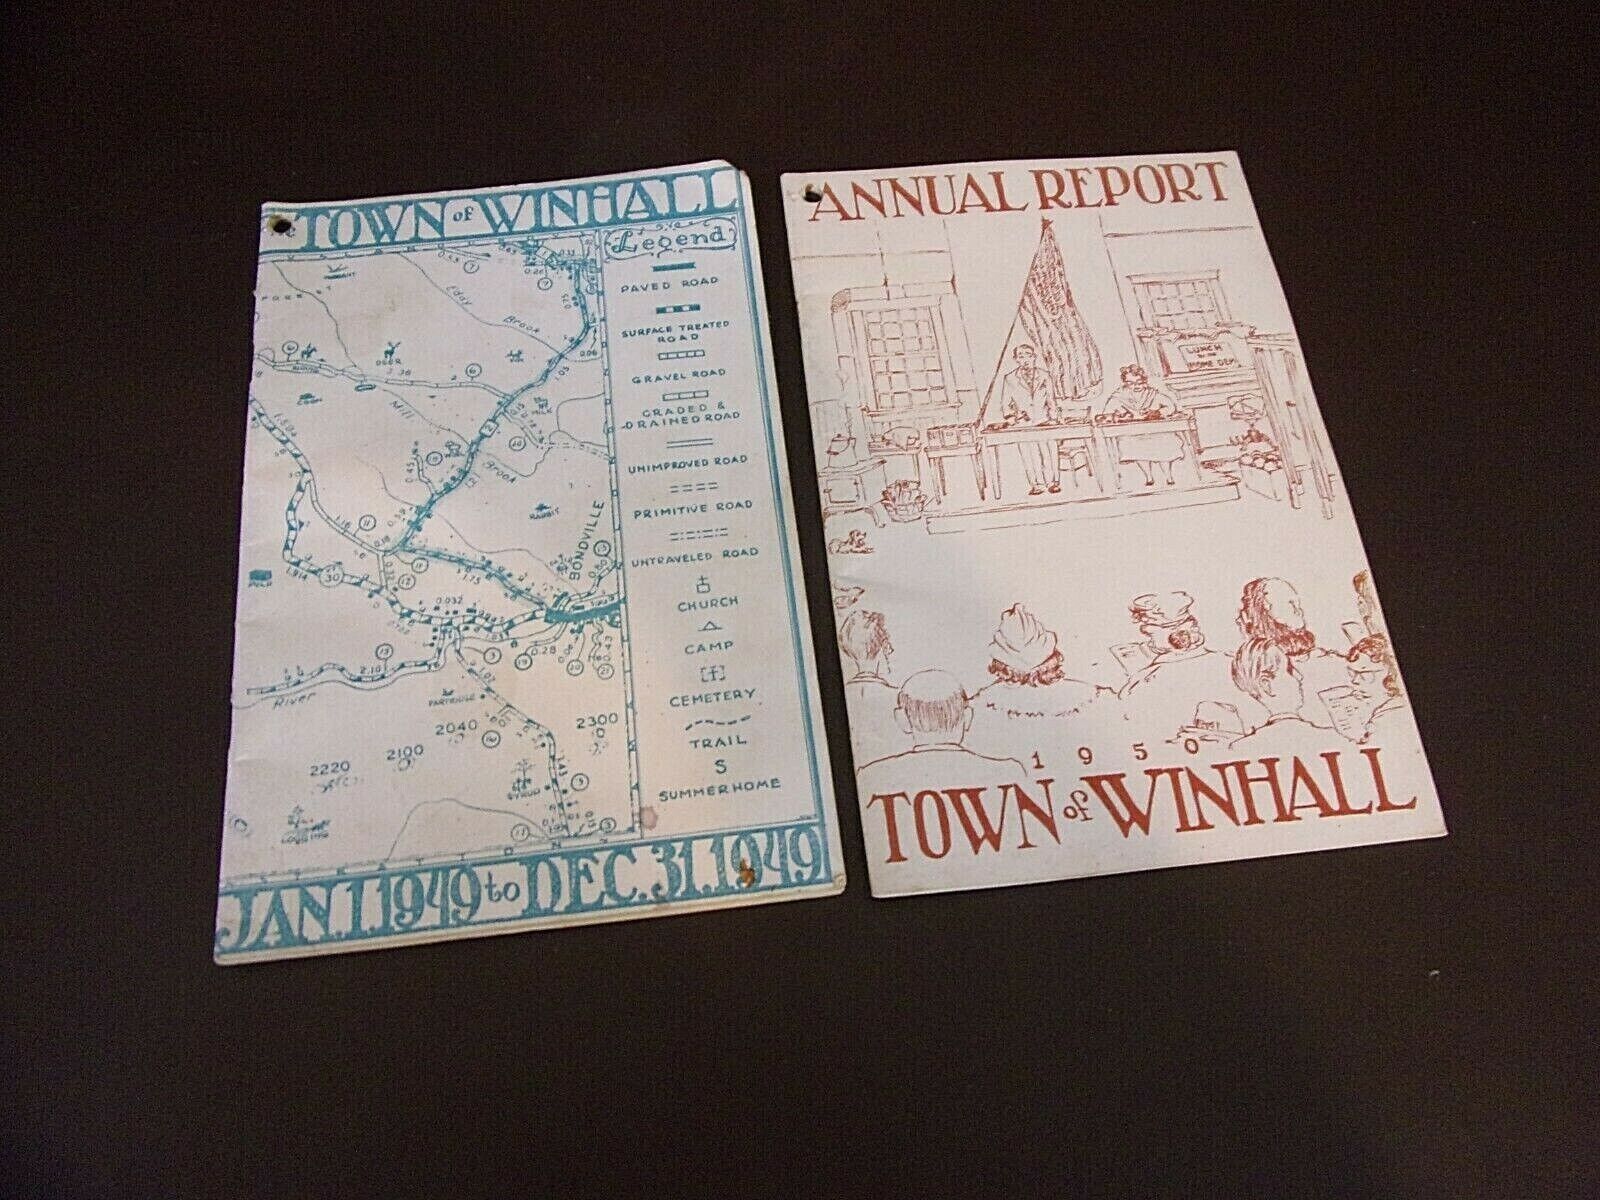 Vintage Town Of Winhall, Vermont Annual Reports 1949 & 1950